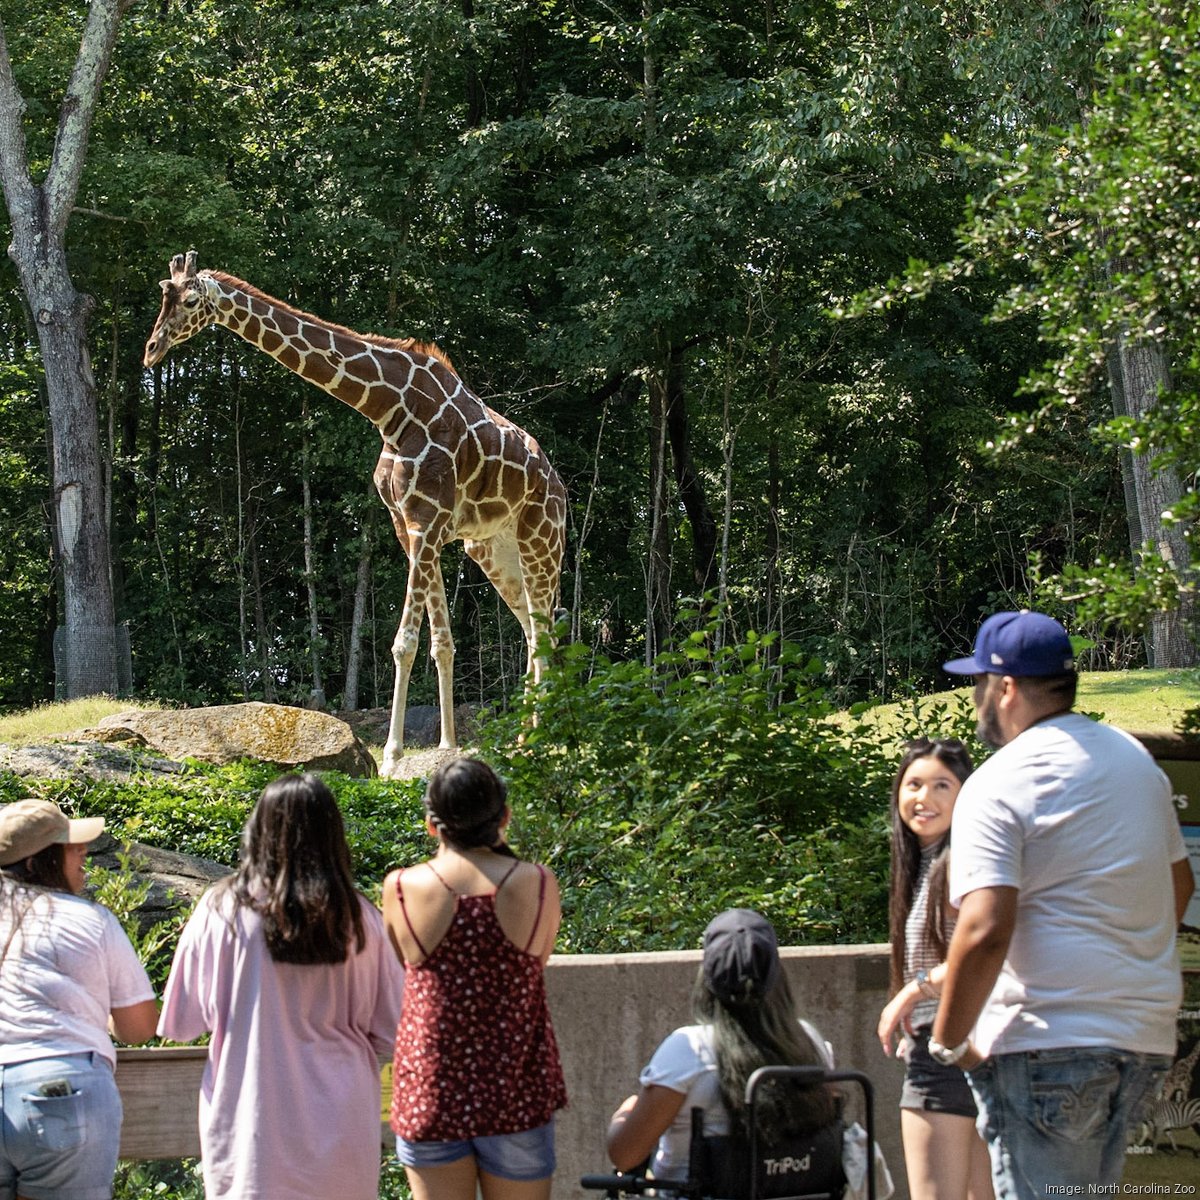 Fitness in the air: Let's hang out - Giraffe in the City